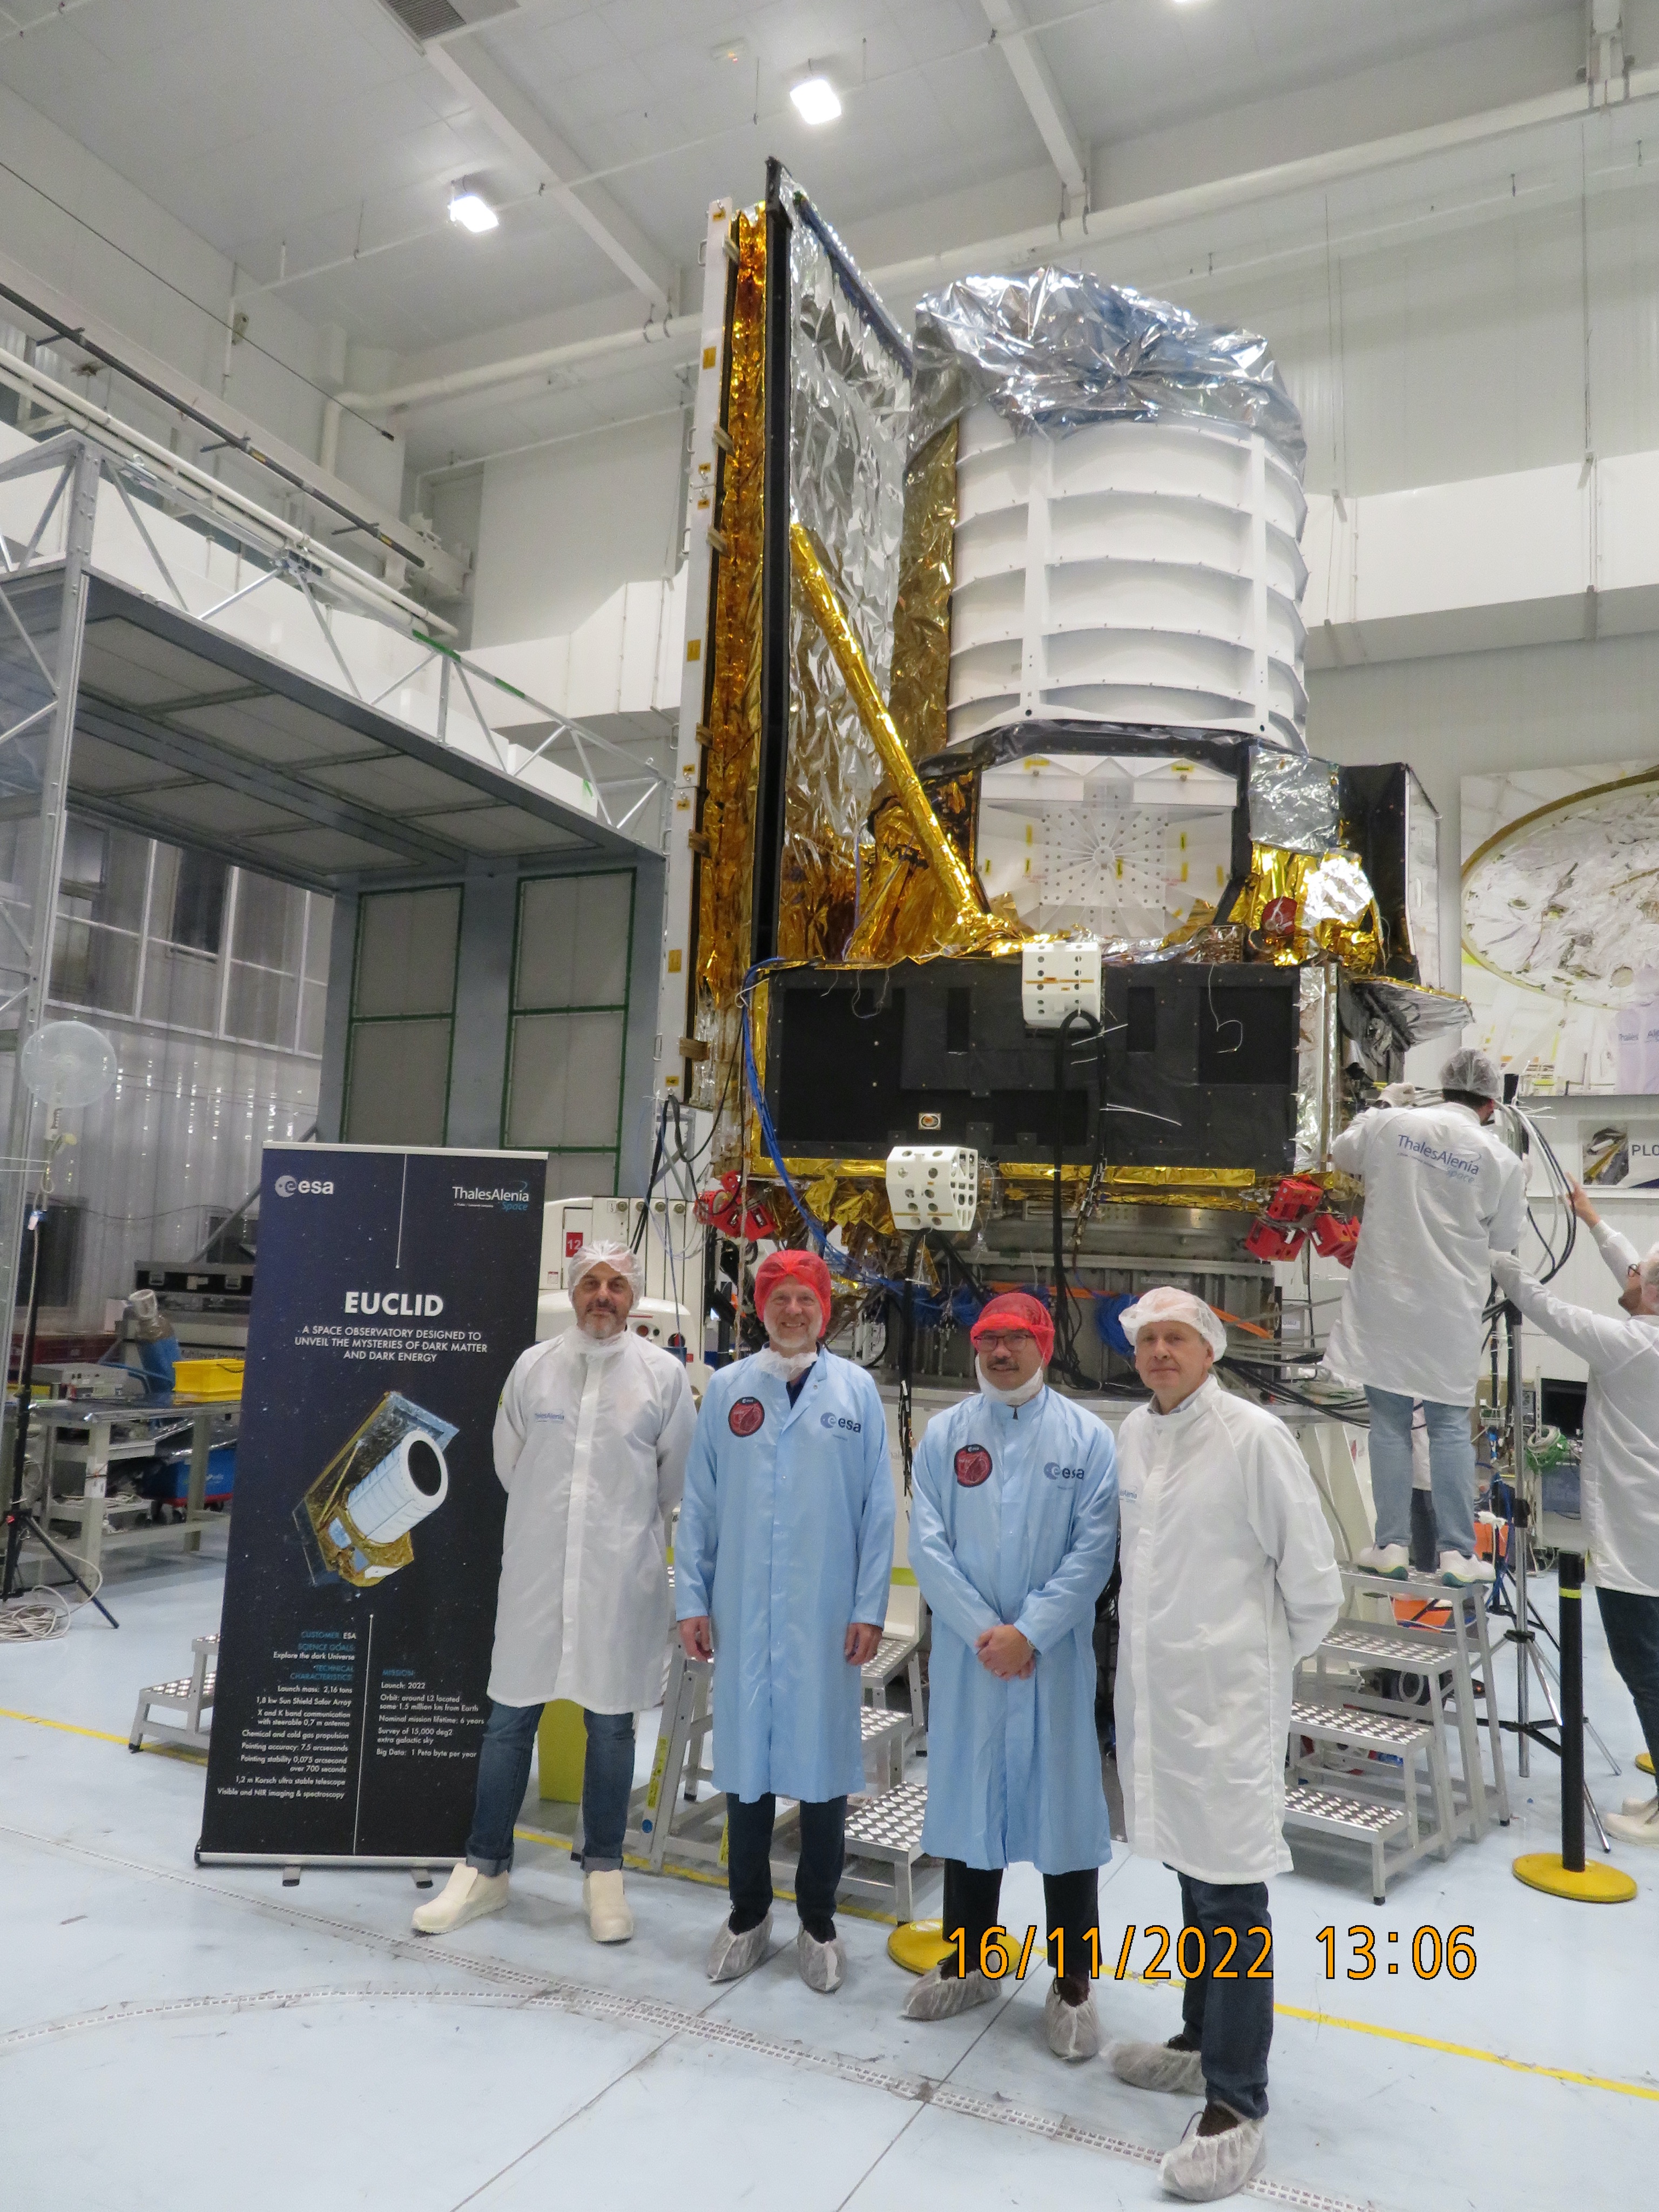 ESA's Euclid mission on Twitter: "1/ Finally close to the Euclid satellite!  ESA project manager (PM) Giuseppe Racca (middle left) and project scientist  René Laureijs (middle right) had this opportunity last Wednesday.